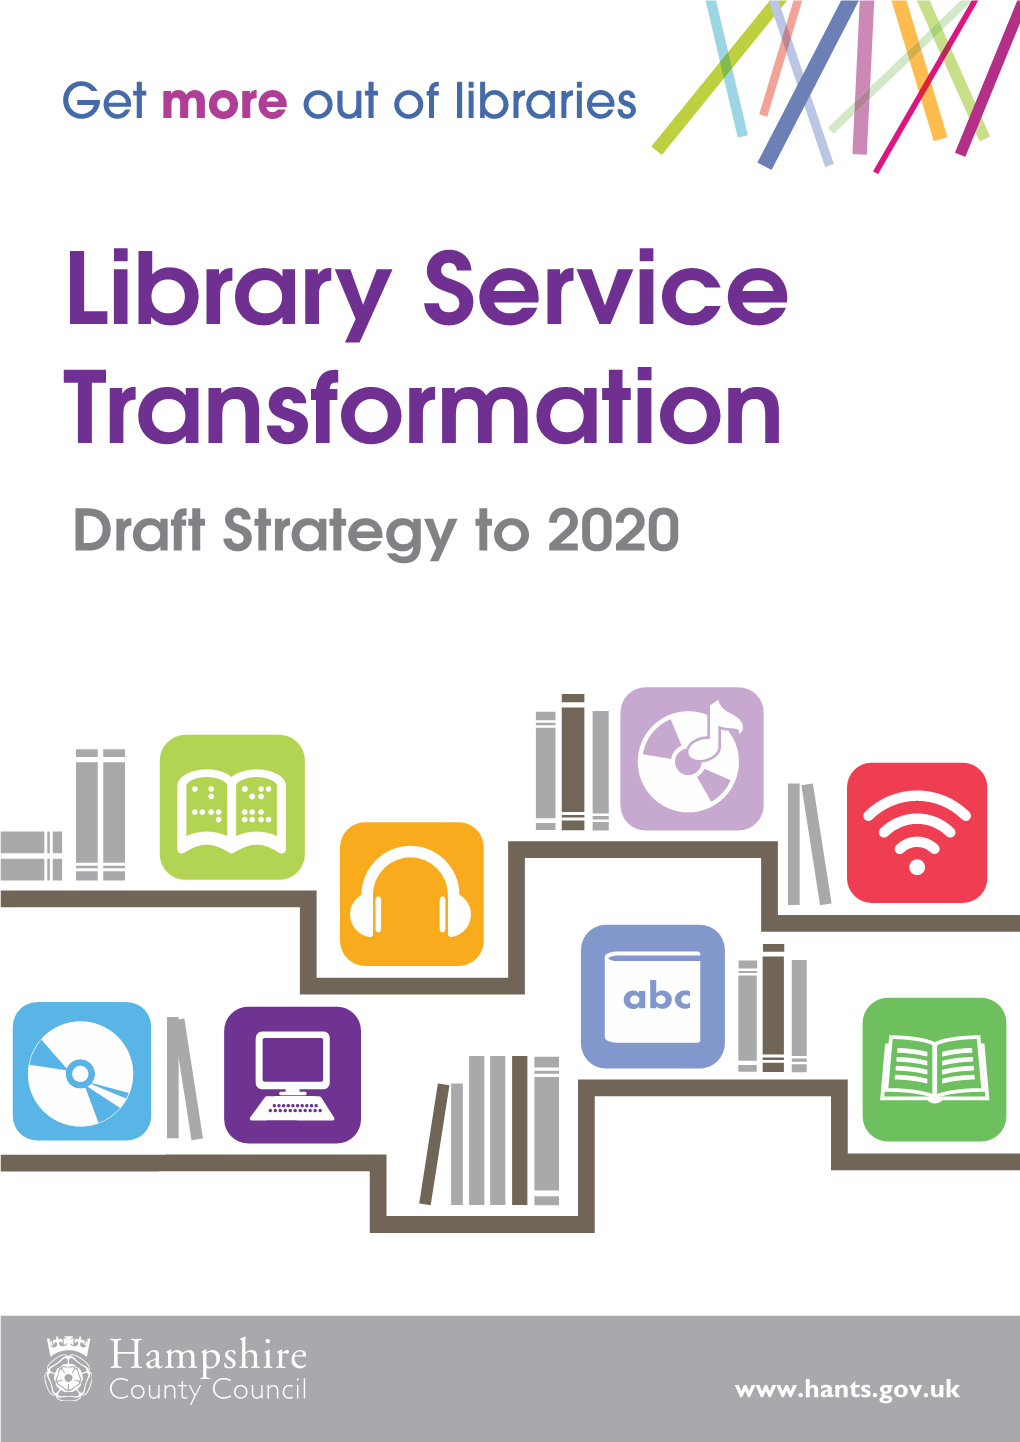 Library Service Transformation Draft Strategy to 2020